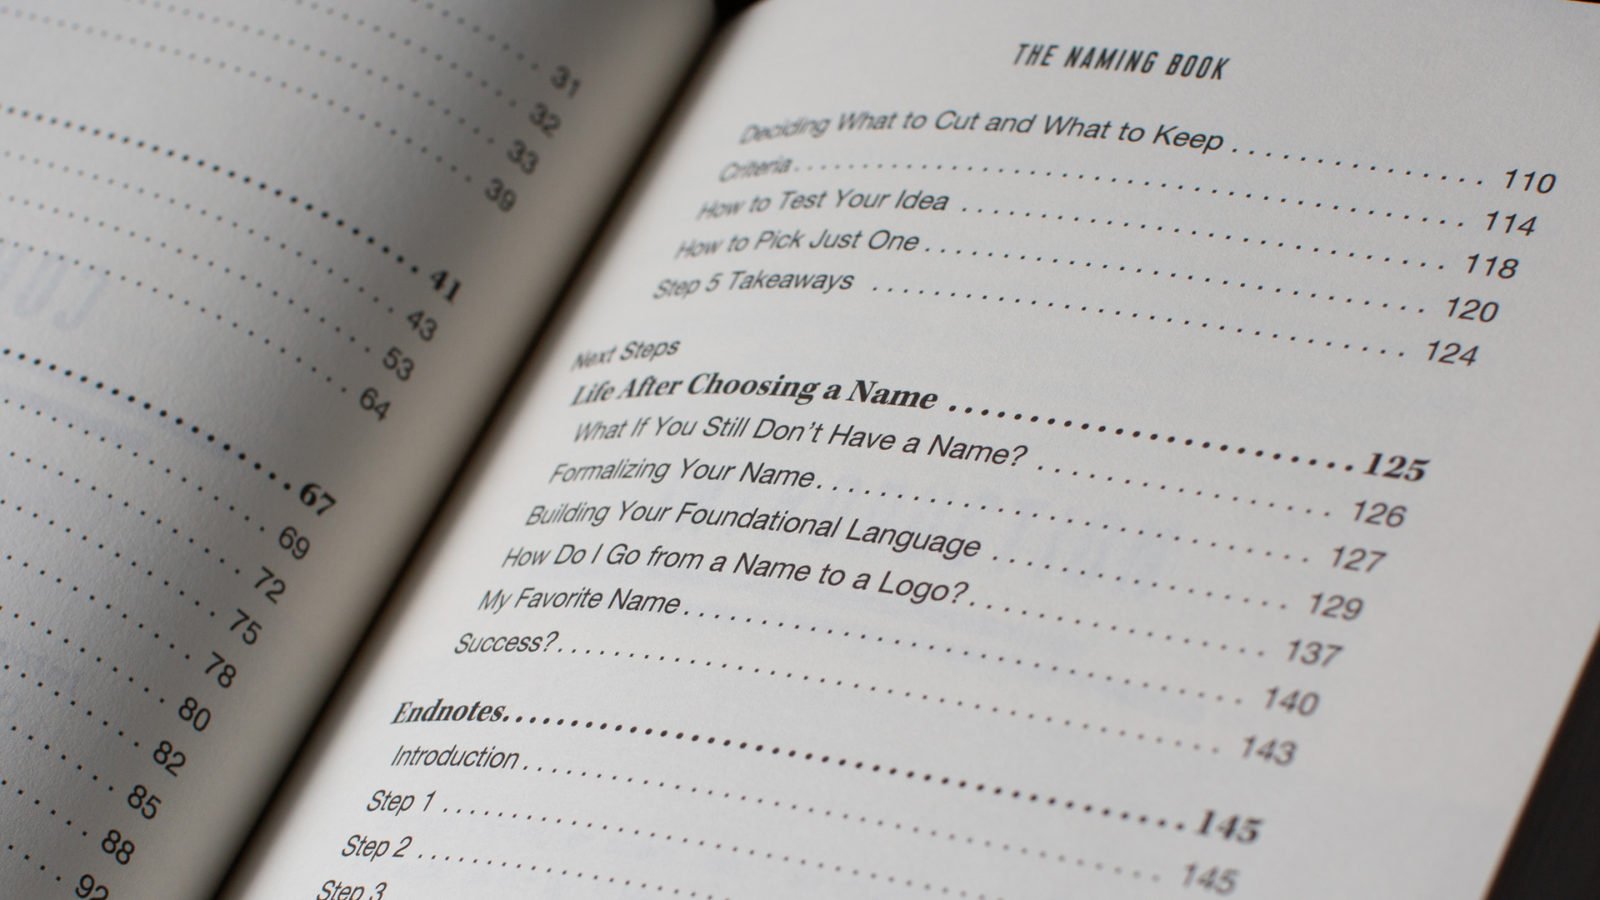 The Naming Book Photography: Table of Contents